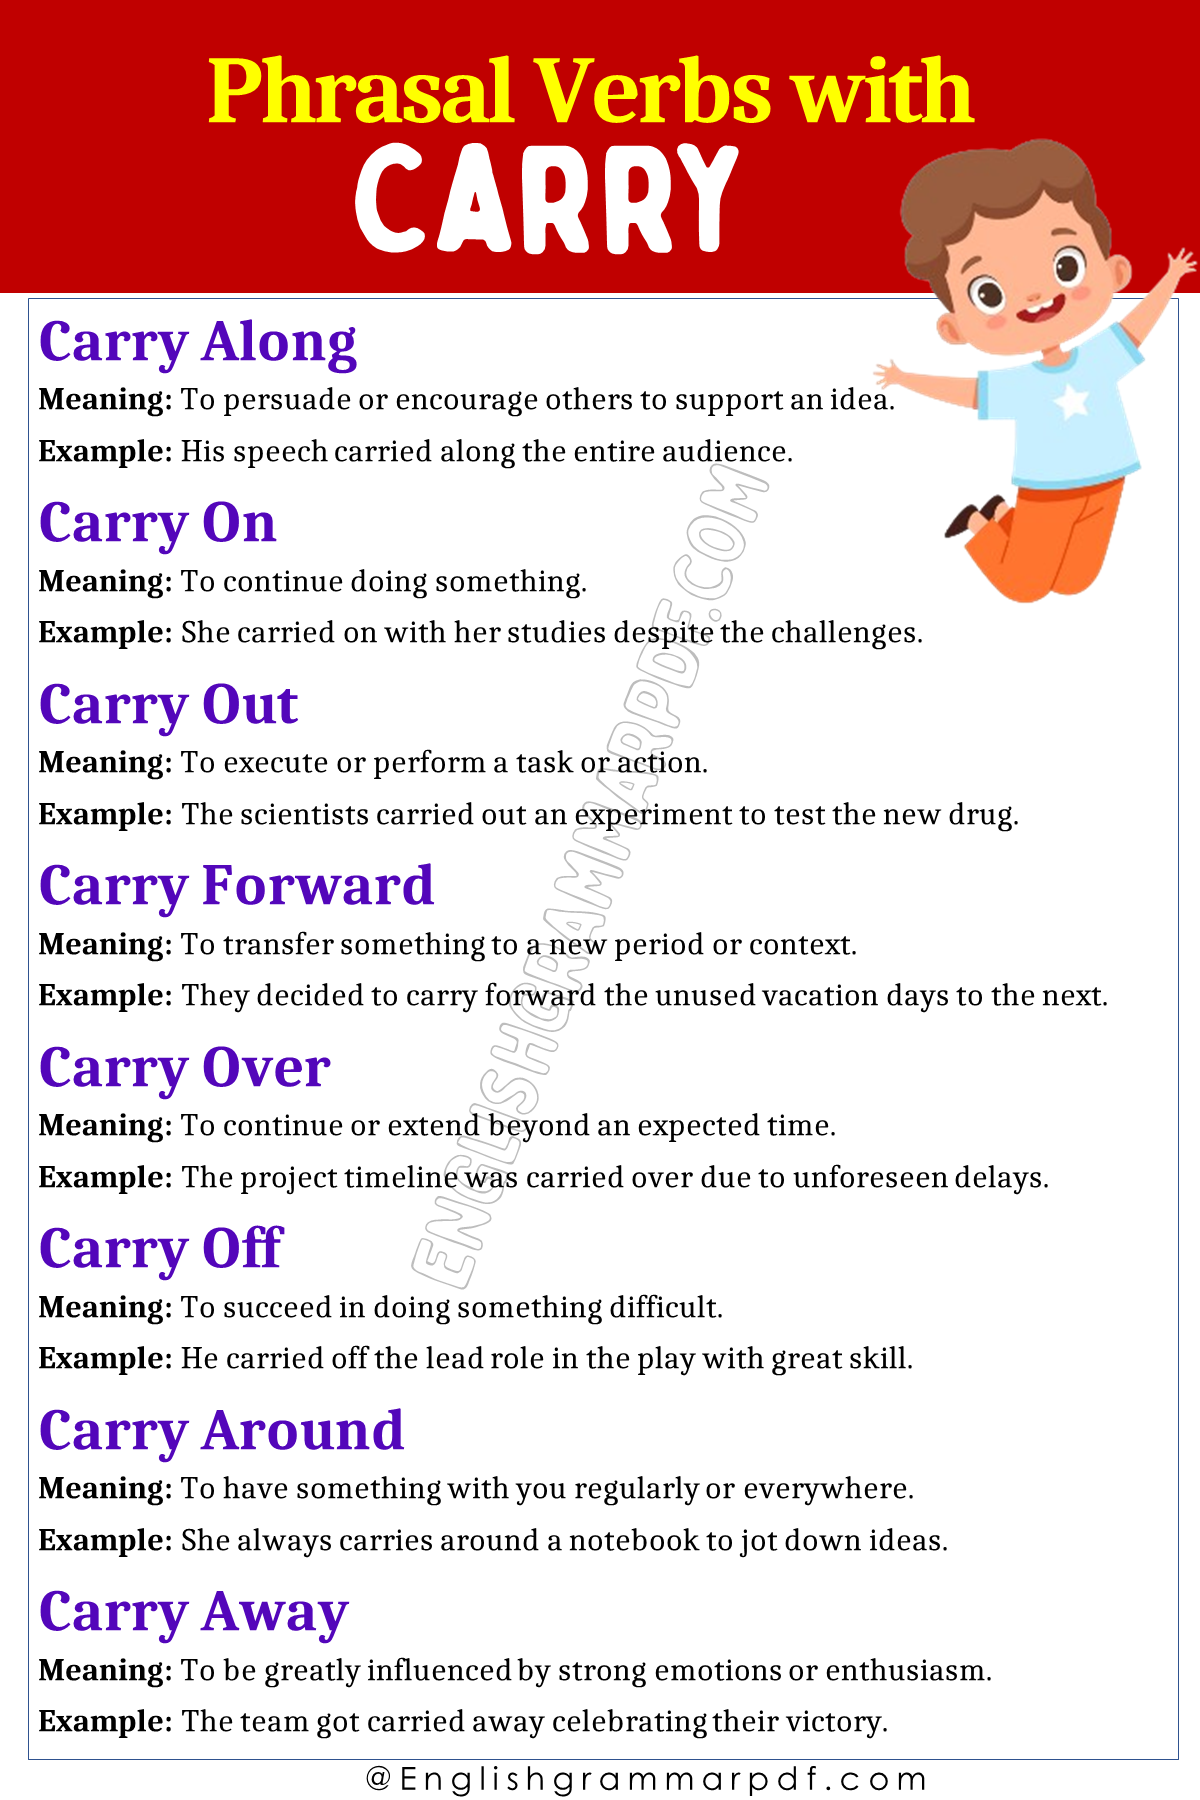 Phrasal Verbs with Carry